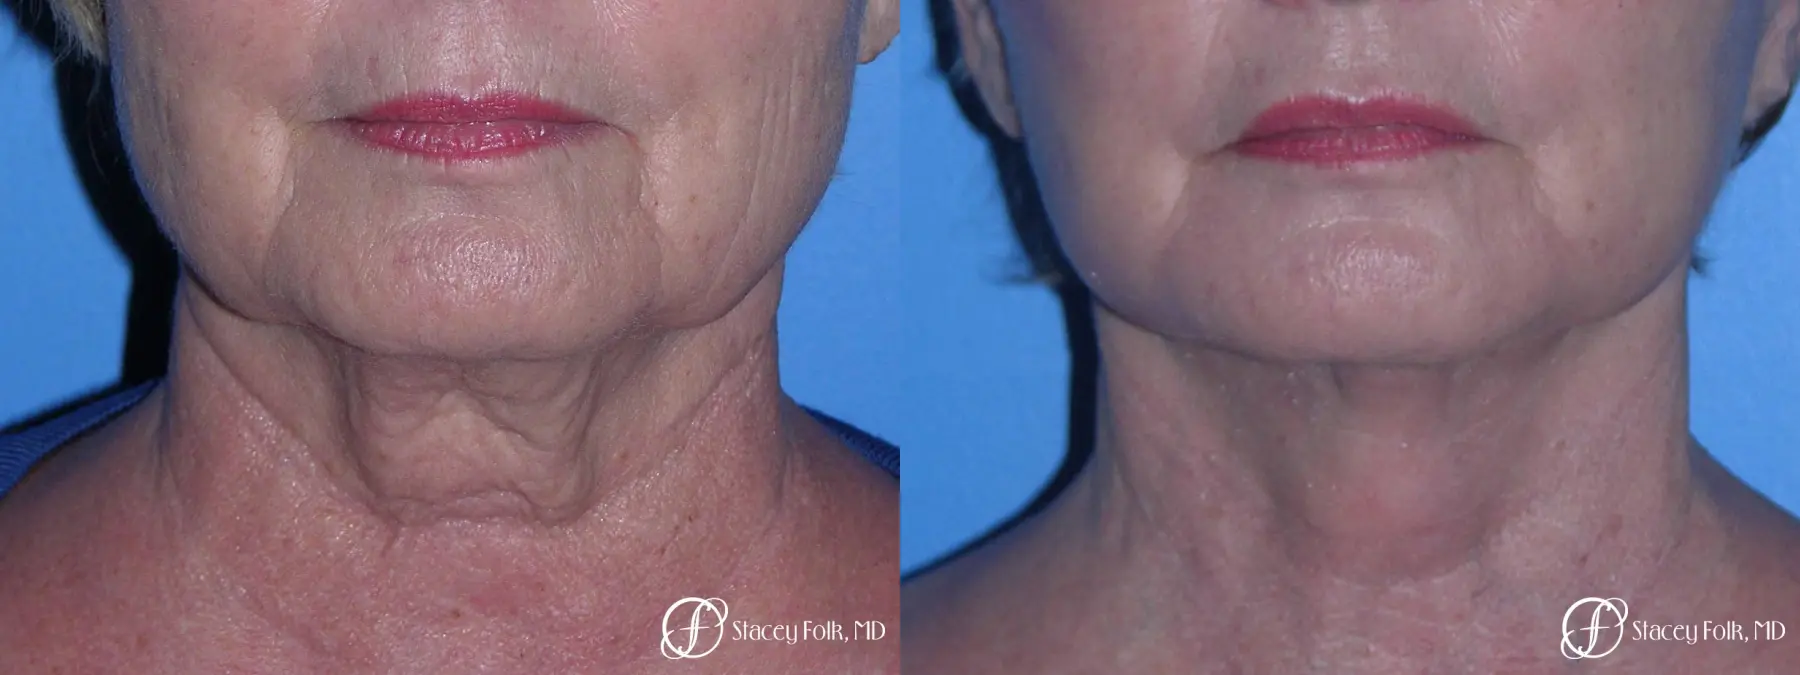 Denver Facial Rejuvenation Face Lift, Fat Injections, and Laser Resurfacing 7120 - Before and After 3